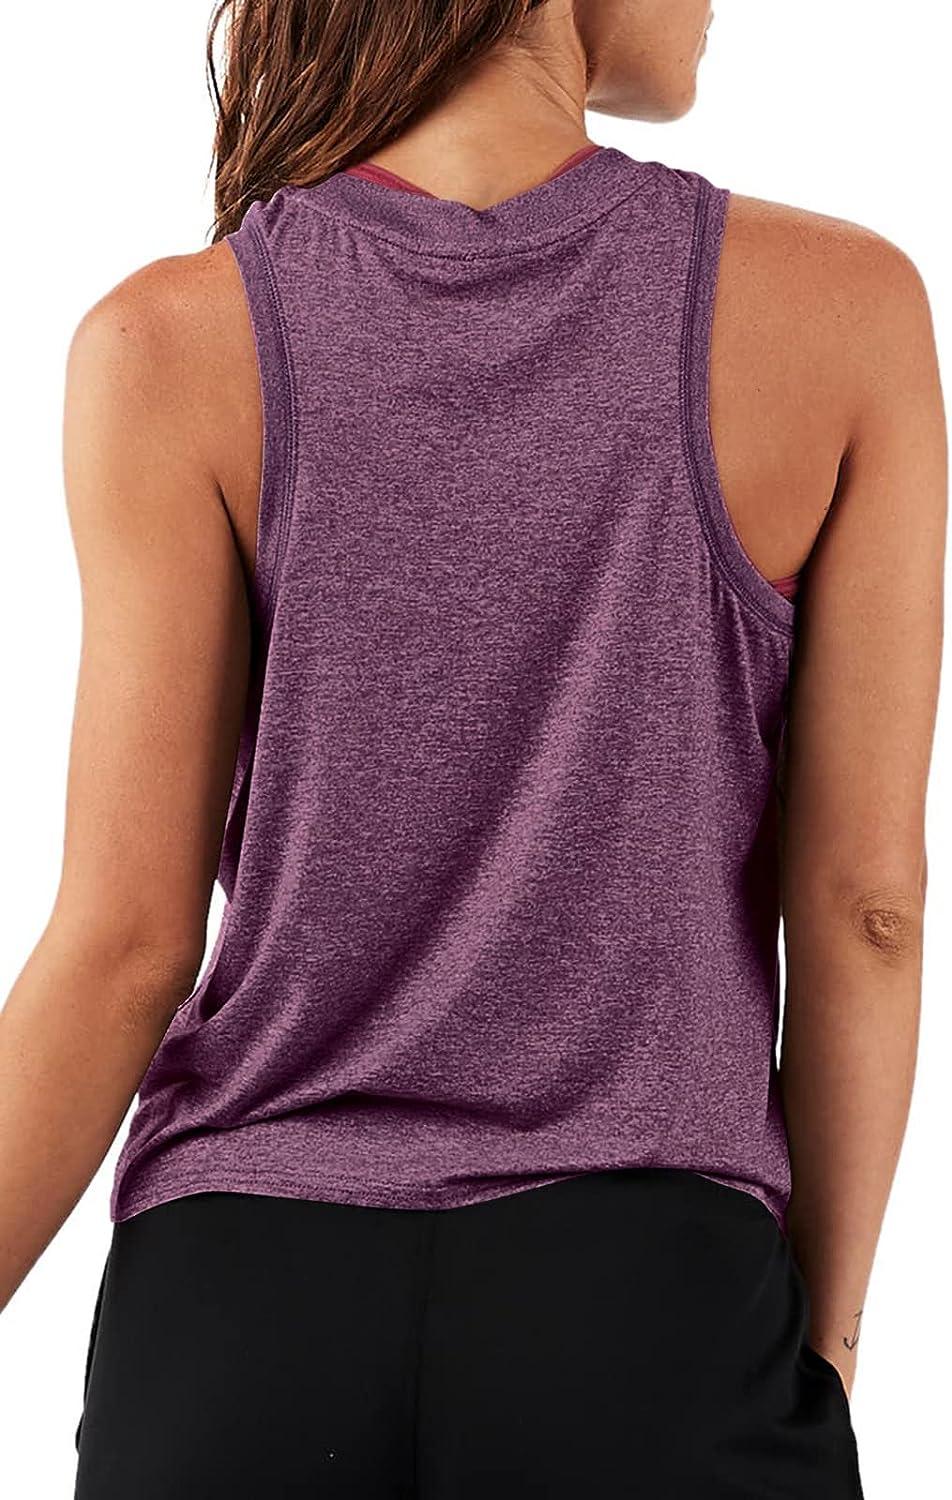  Workout Crop Tops For Women Cute Loose Fit Tank Tops Casual  Summer Yoga Athletic Sports Tanks Cinched Waist Cropped Tops Cap Sleeve Gym  Cotton T Shirts For Women Purple S